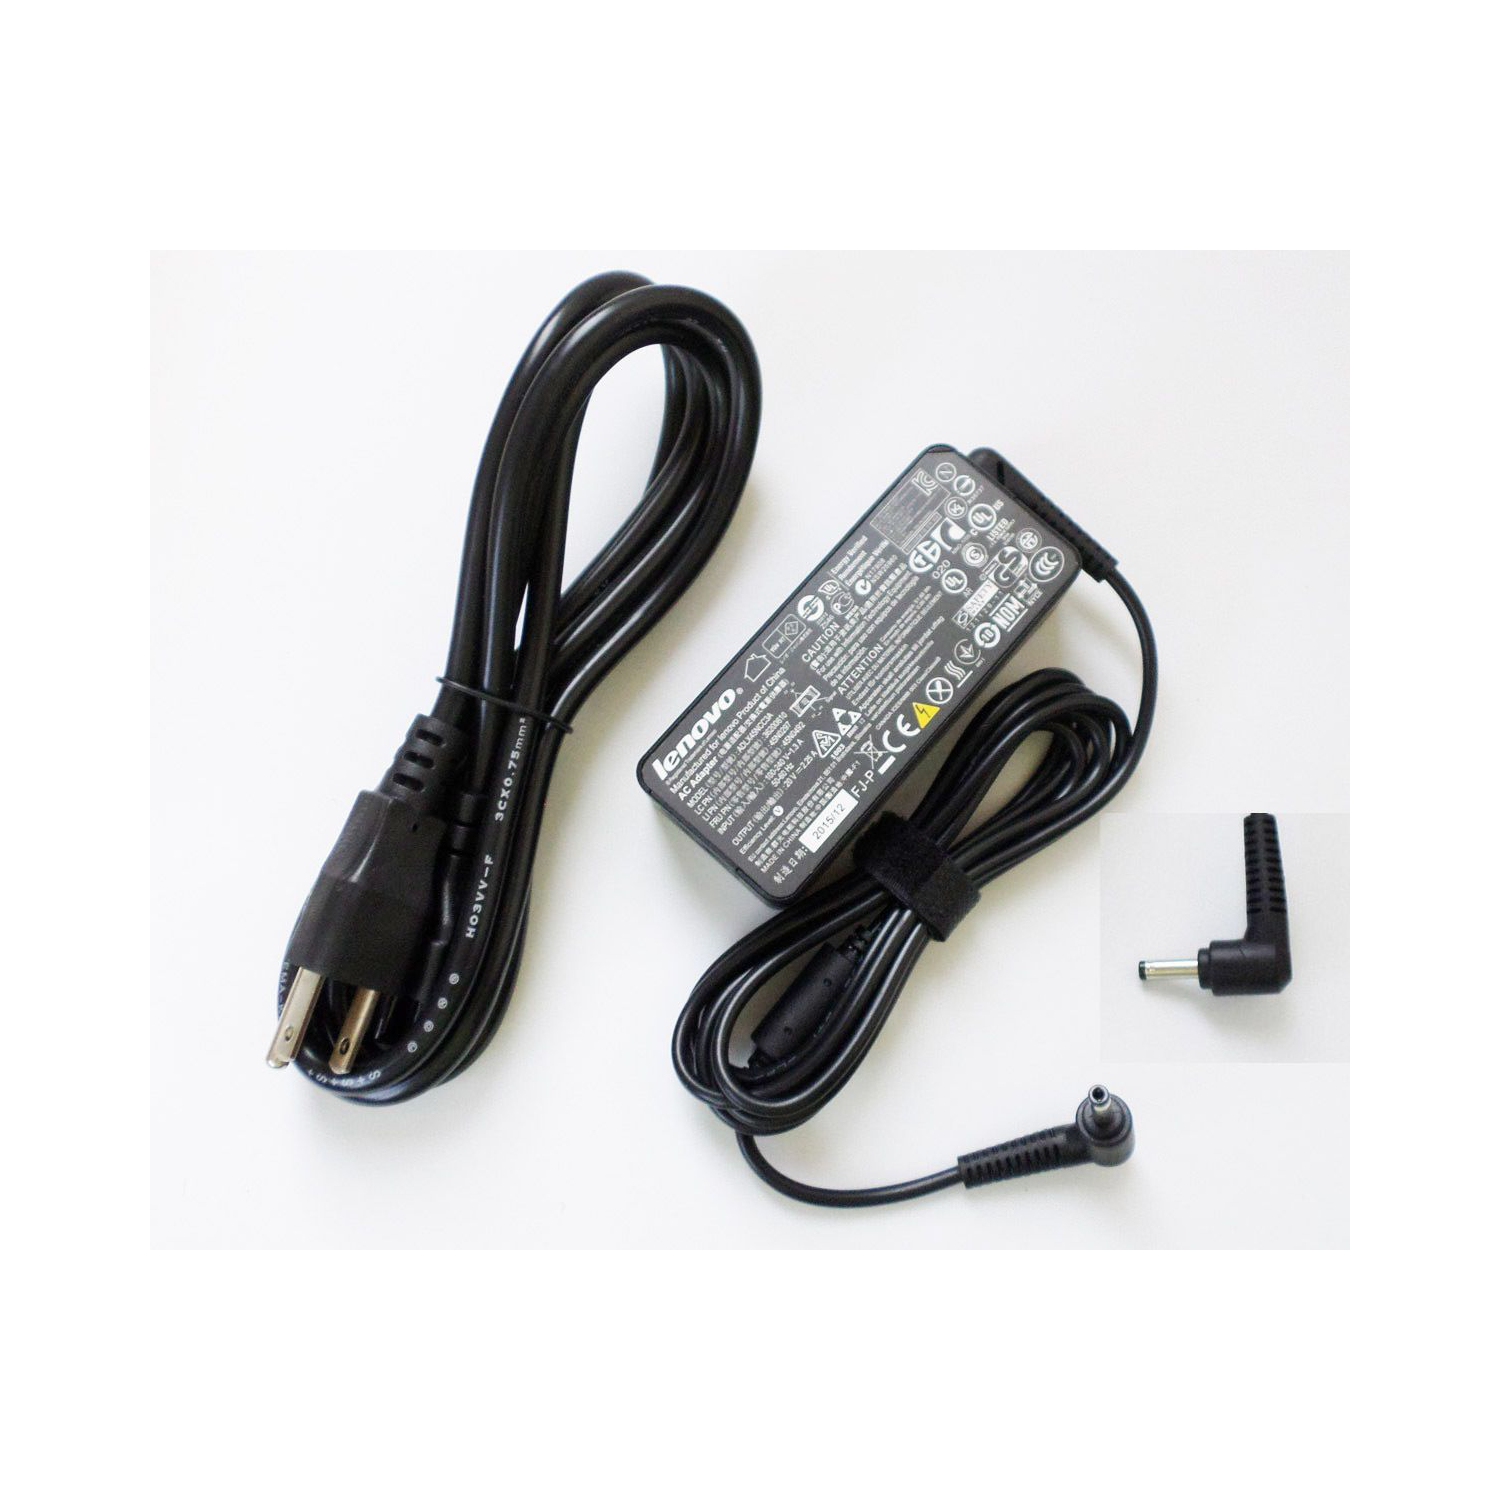 New Genuine Lenovo Yoga 510 710 Series AC Adapter Charger 45W